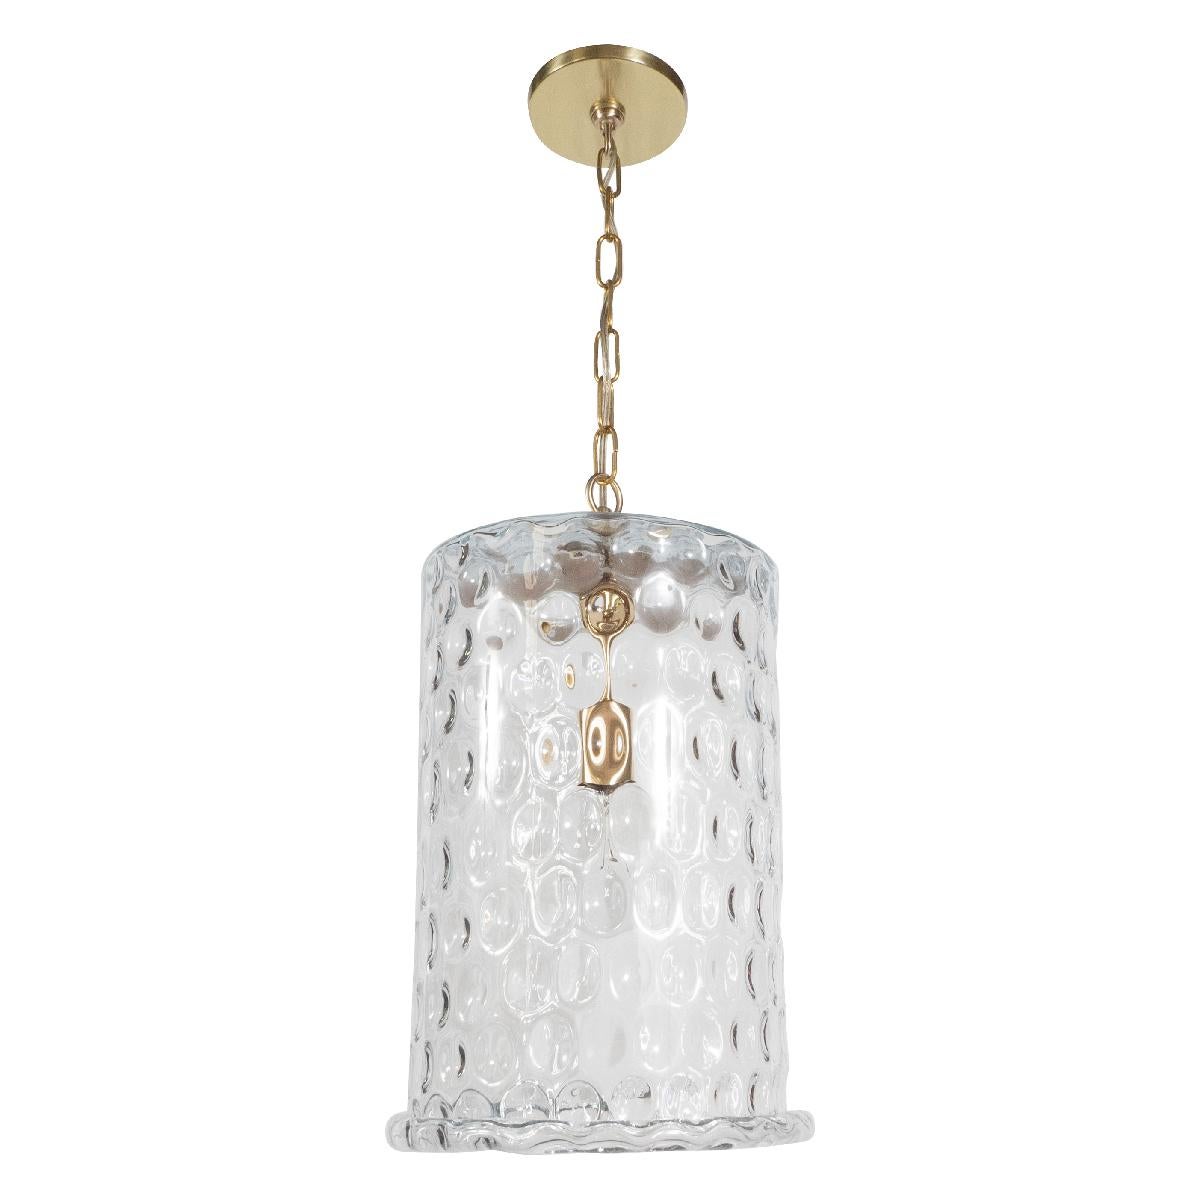 Mid-Century style pendant ceiling fixture composed of a cylindrical dimpled glass shade with brass hardware by Spark Interior. Measured without chain. Additional quantities can be made to order.